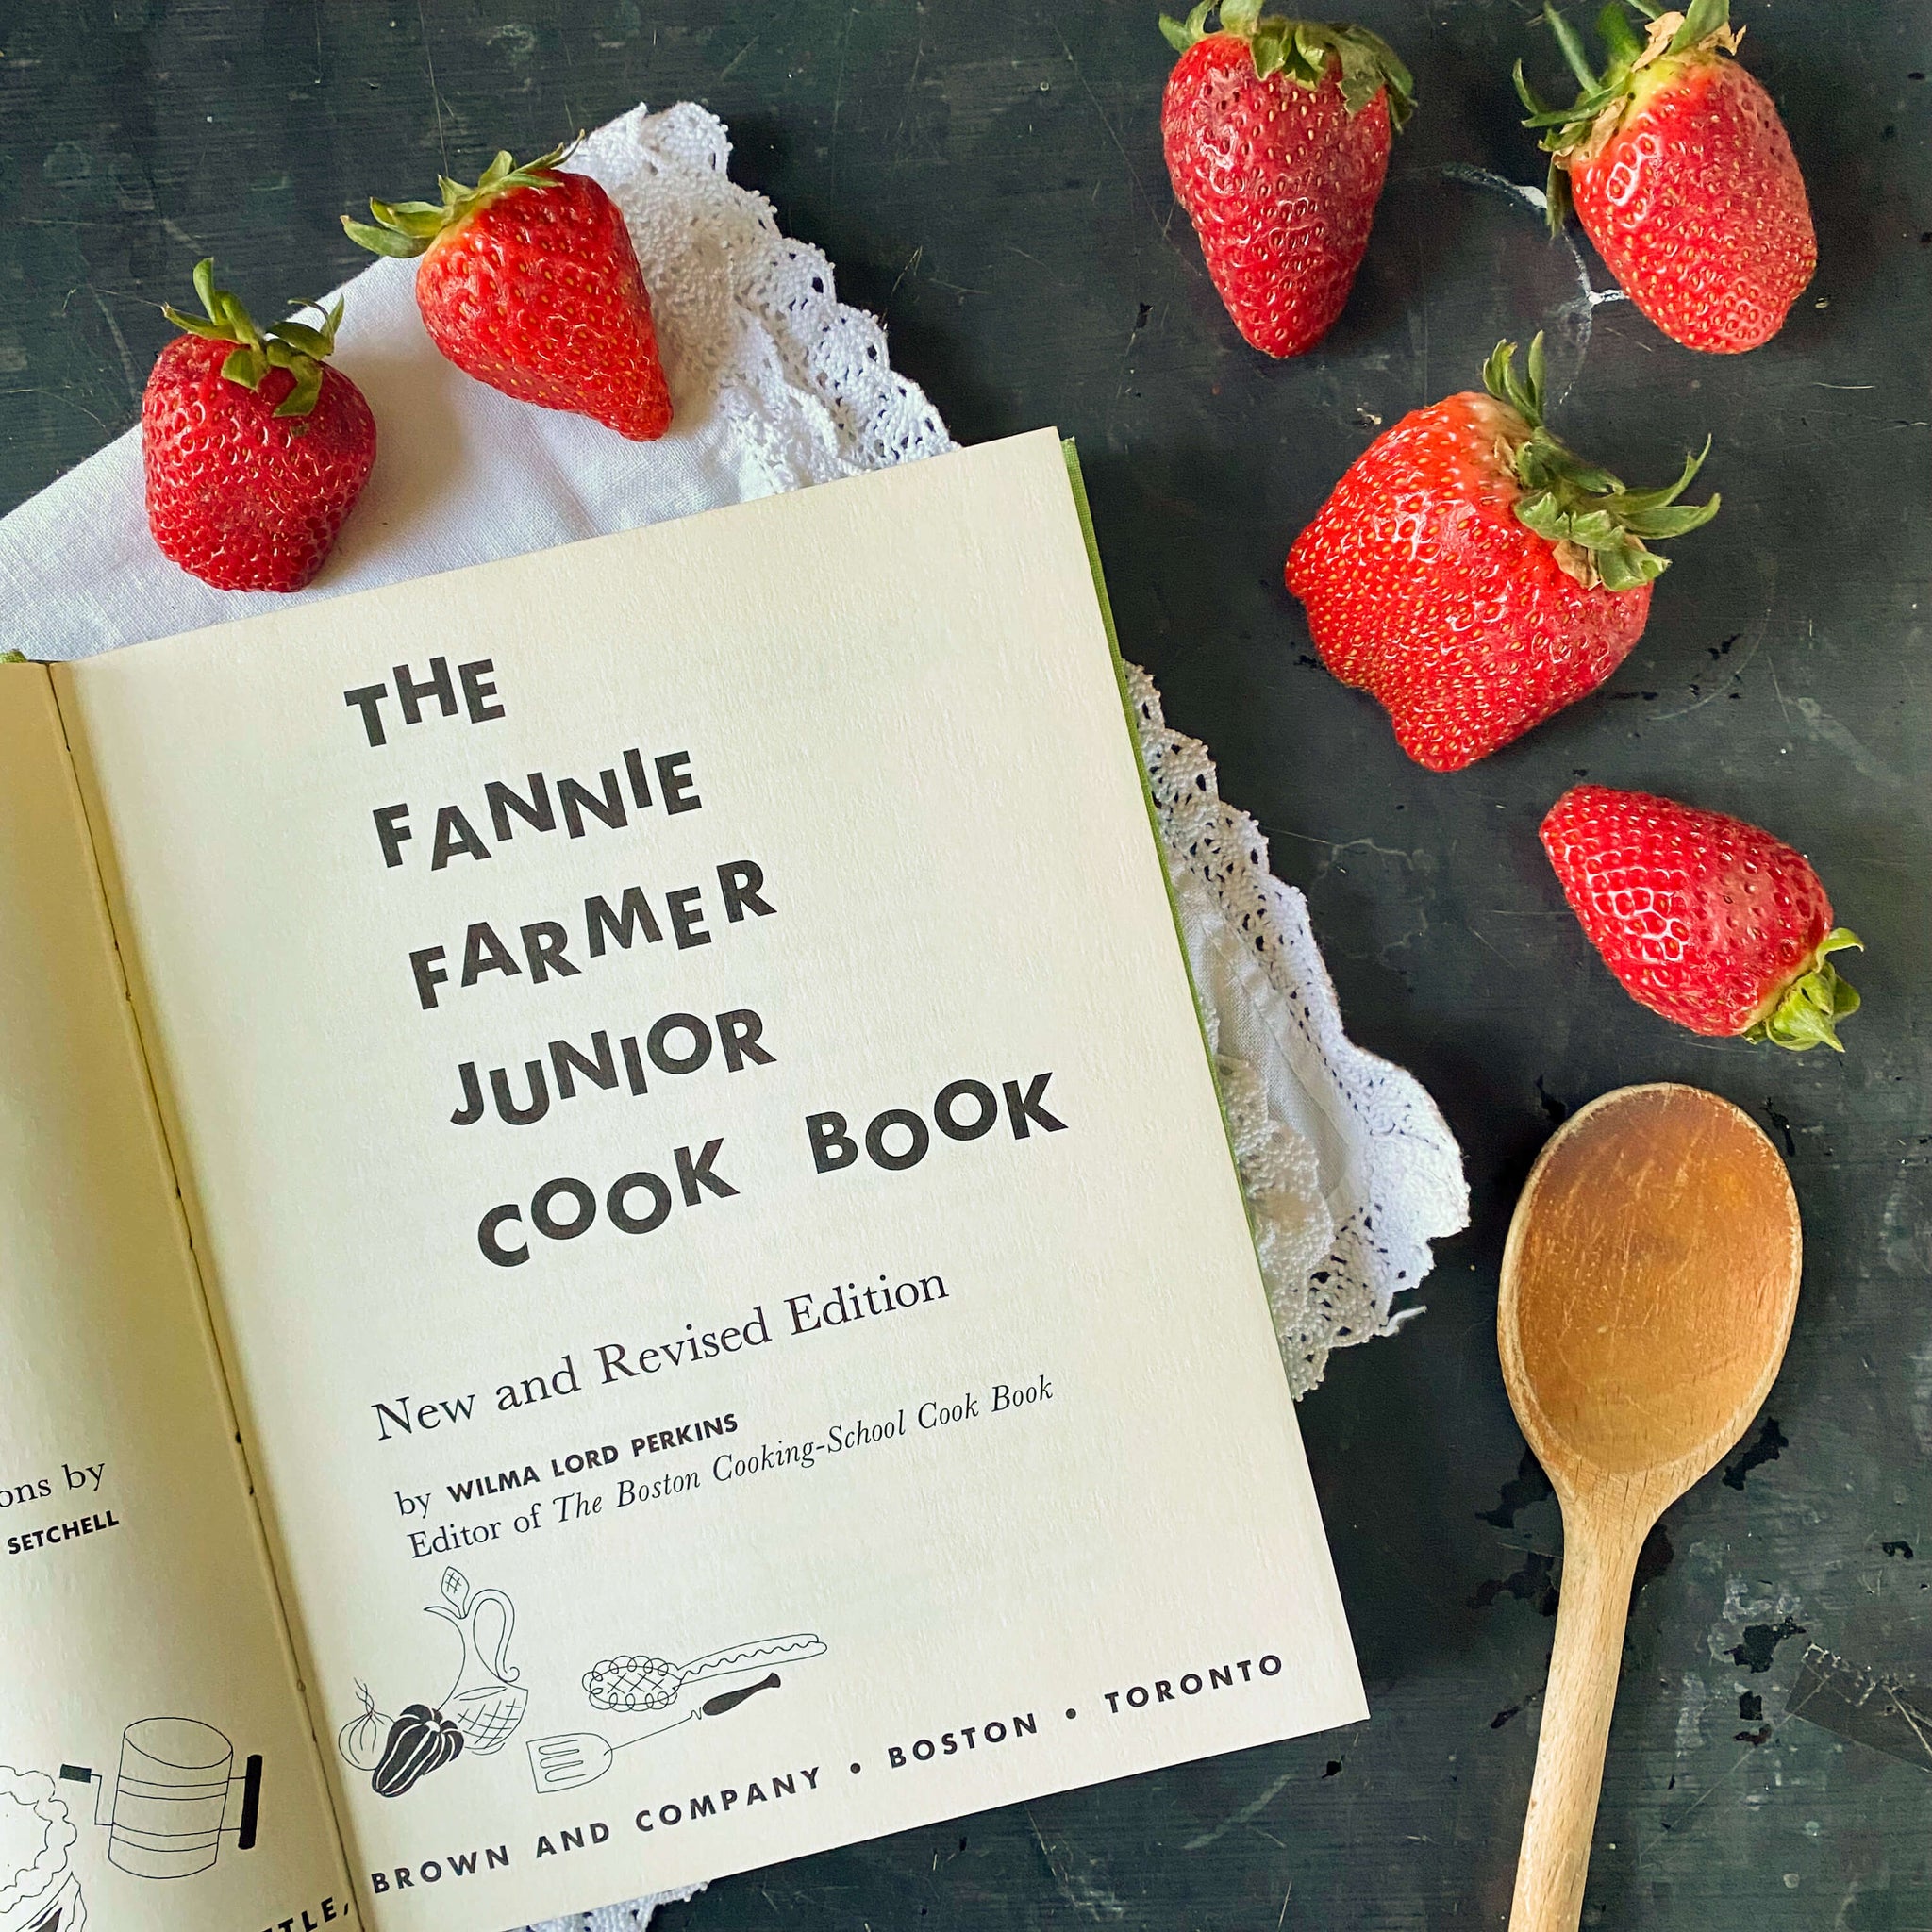 The Fannie Farmer Junior Cook Book by Wilma Lord Perkins - 1957 Edition 11th Printing